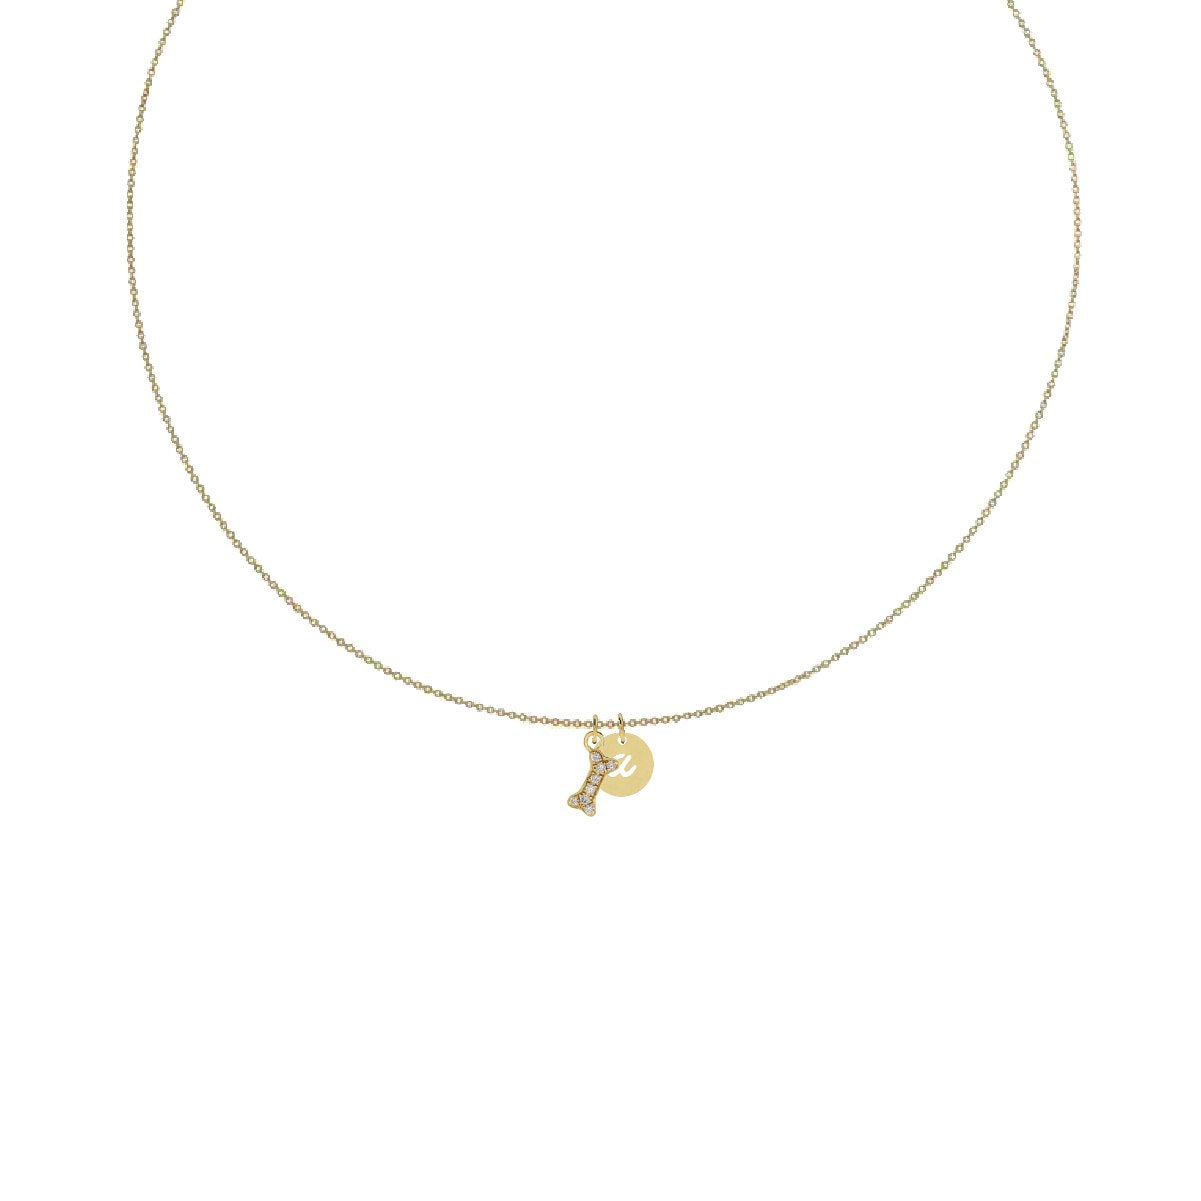 Charm Collection - For the Dog Lover Robyn Canady Charm + 14K Gold Filled Chain Add an Initial (put initial selection in notes at checkout) 